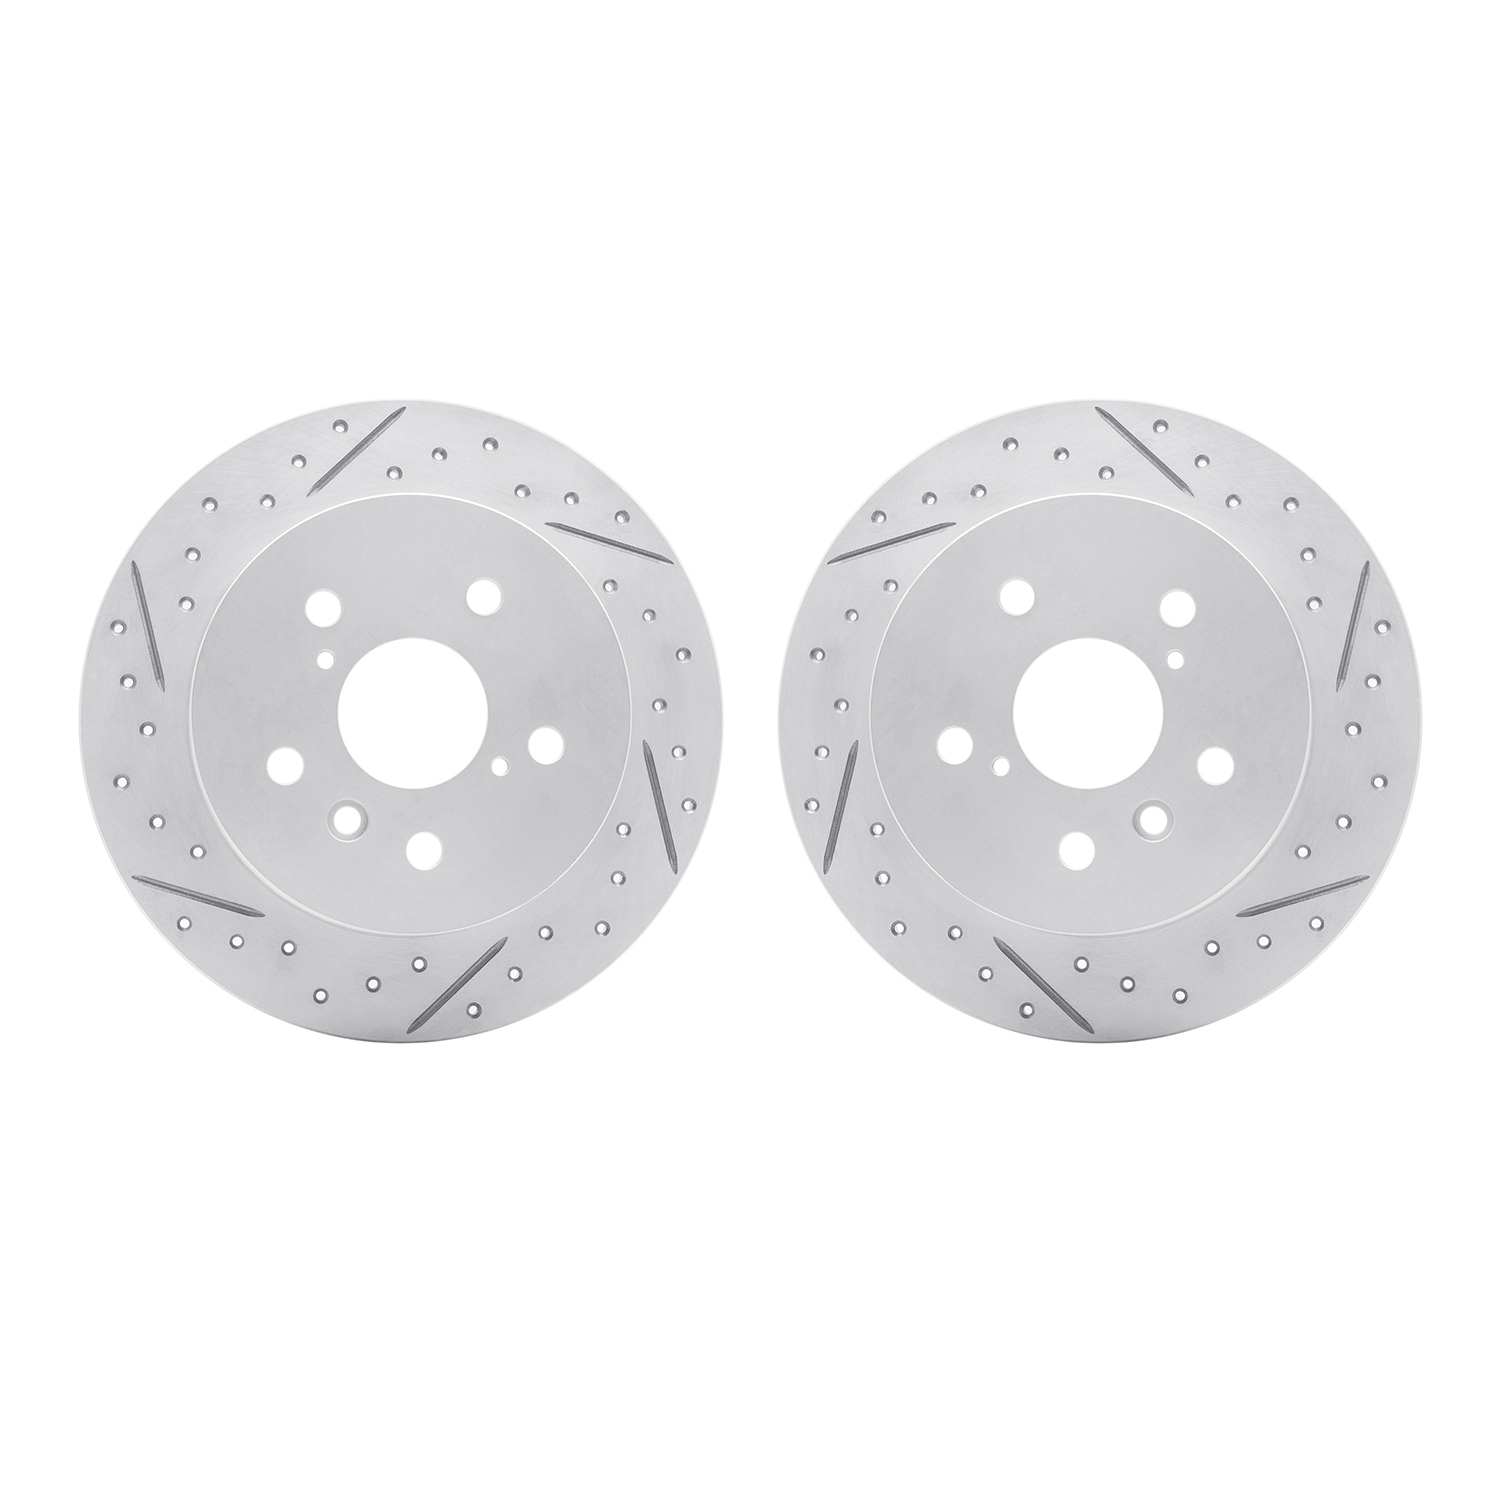 2002-76058 Geoperformance Drilled/Slotted Brake Rotors, Fits Select Lexus/Toyota/Scion, Position: Rear